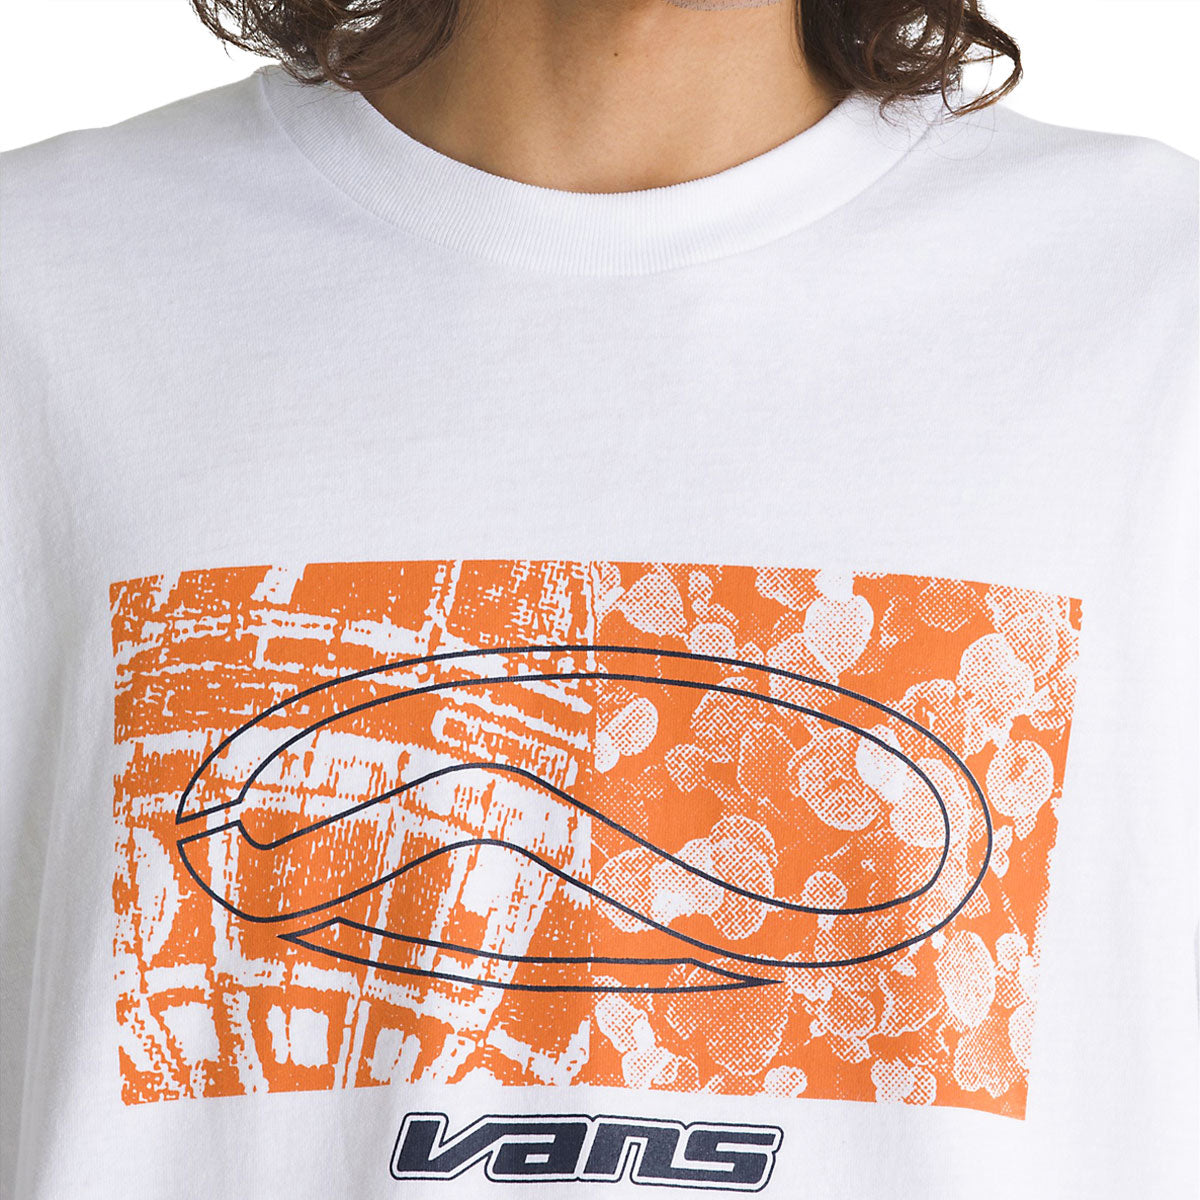 Vans Off The Wall II Loose Skate Classics Long Sleeve T-Shirt - White image 3